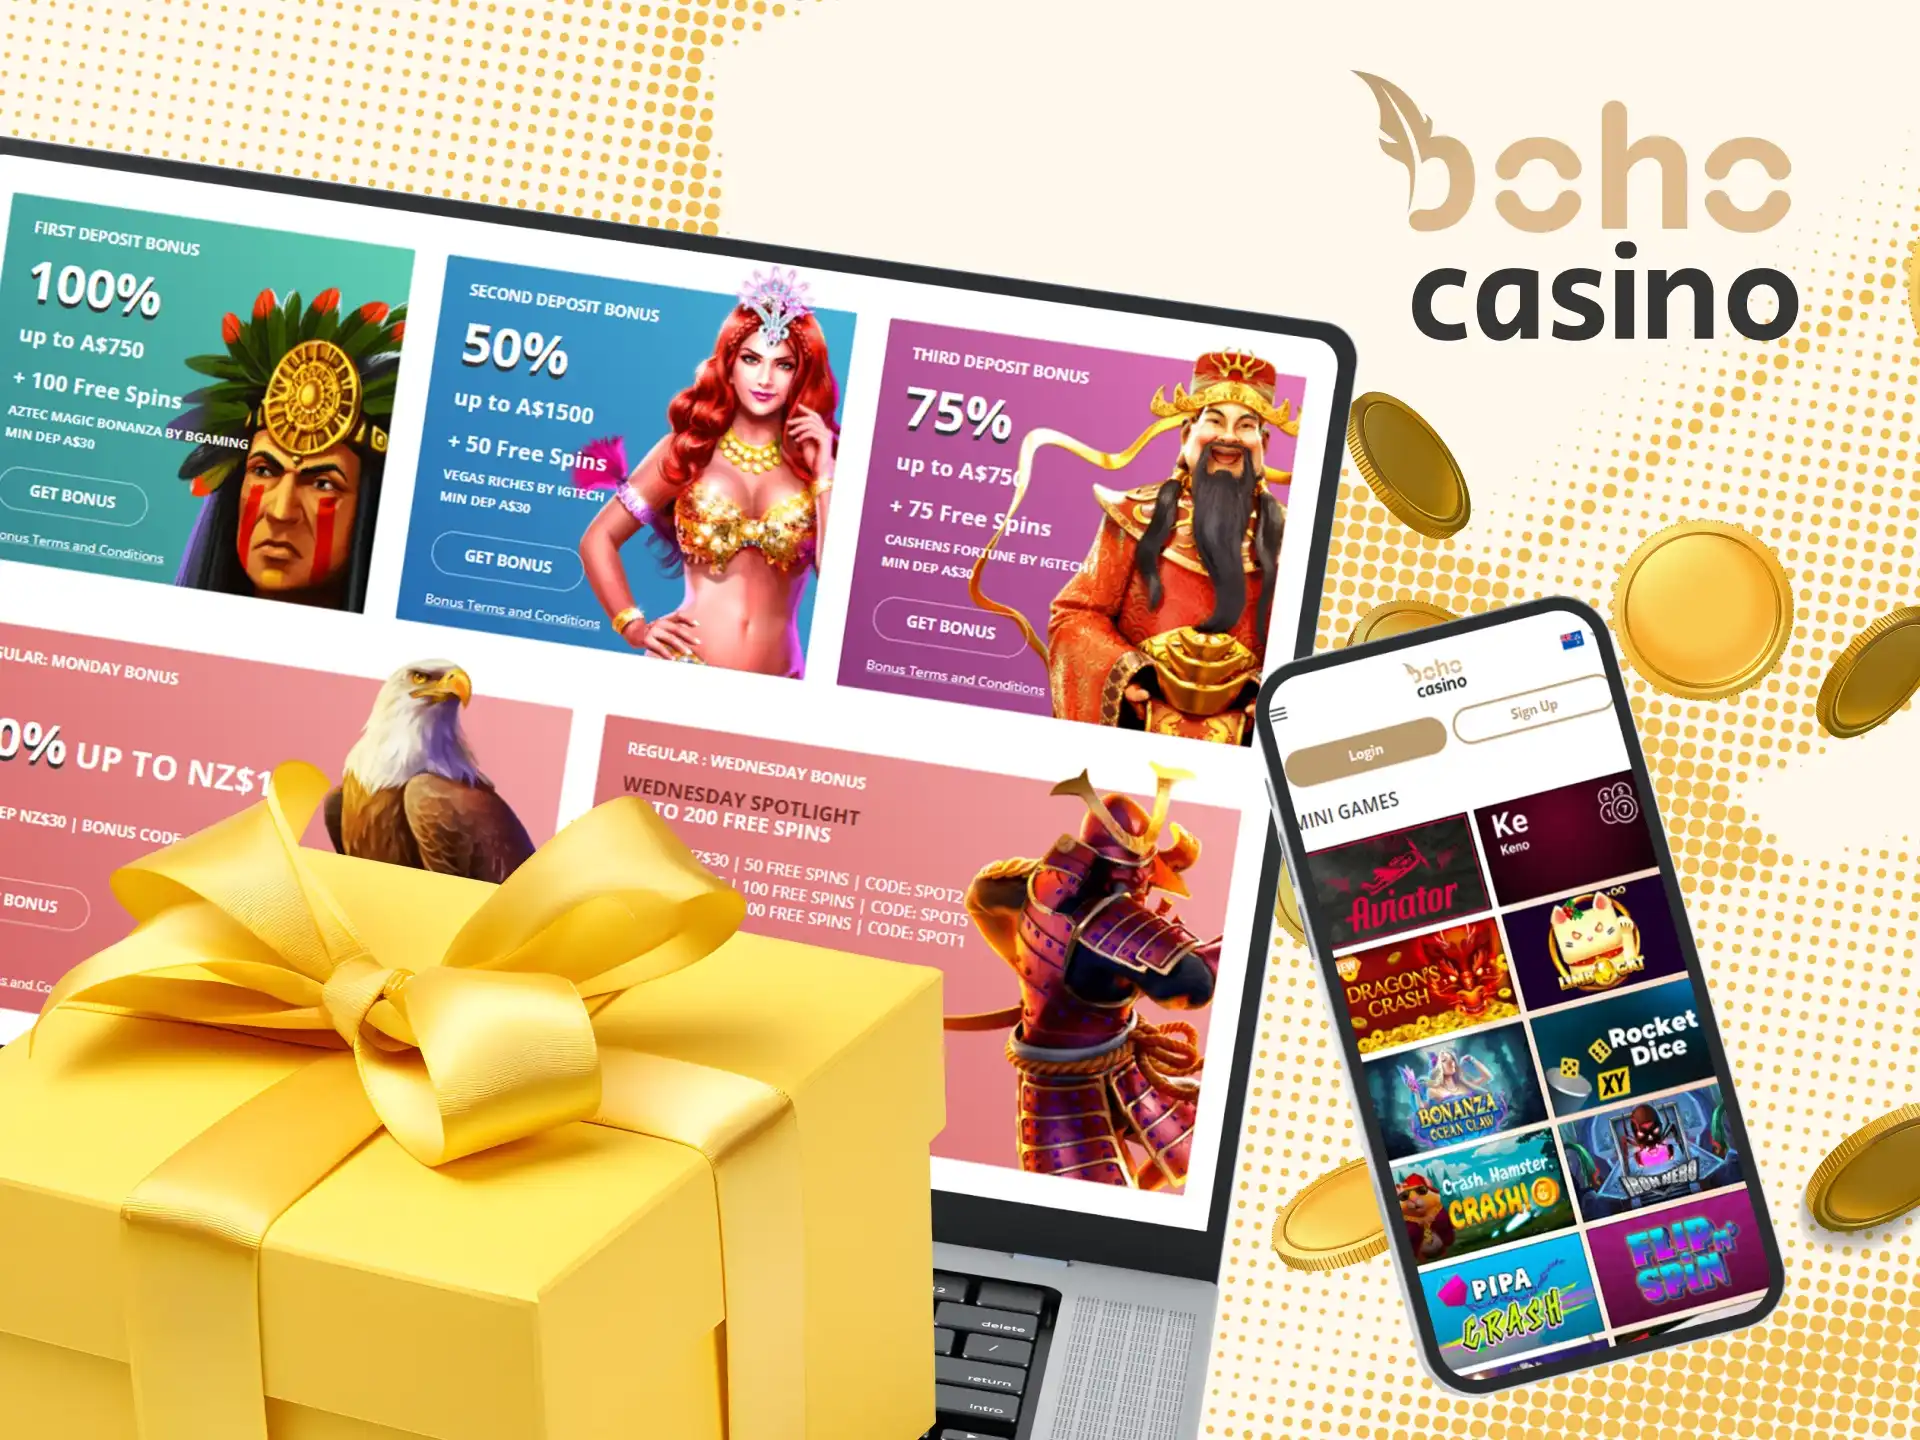 Find out what bonuses for mini-games Boho Casino offers.